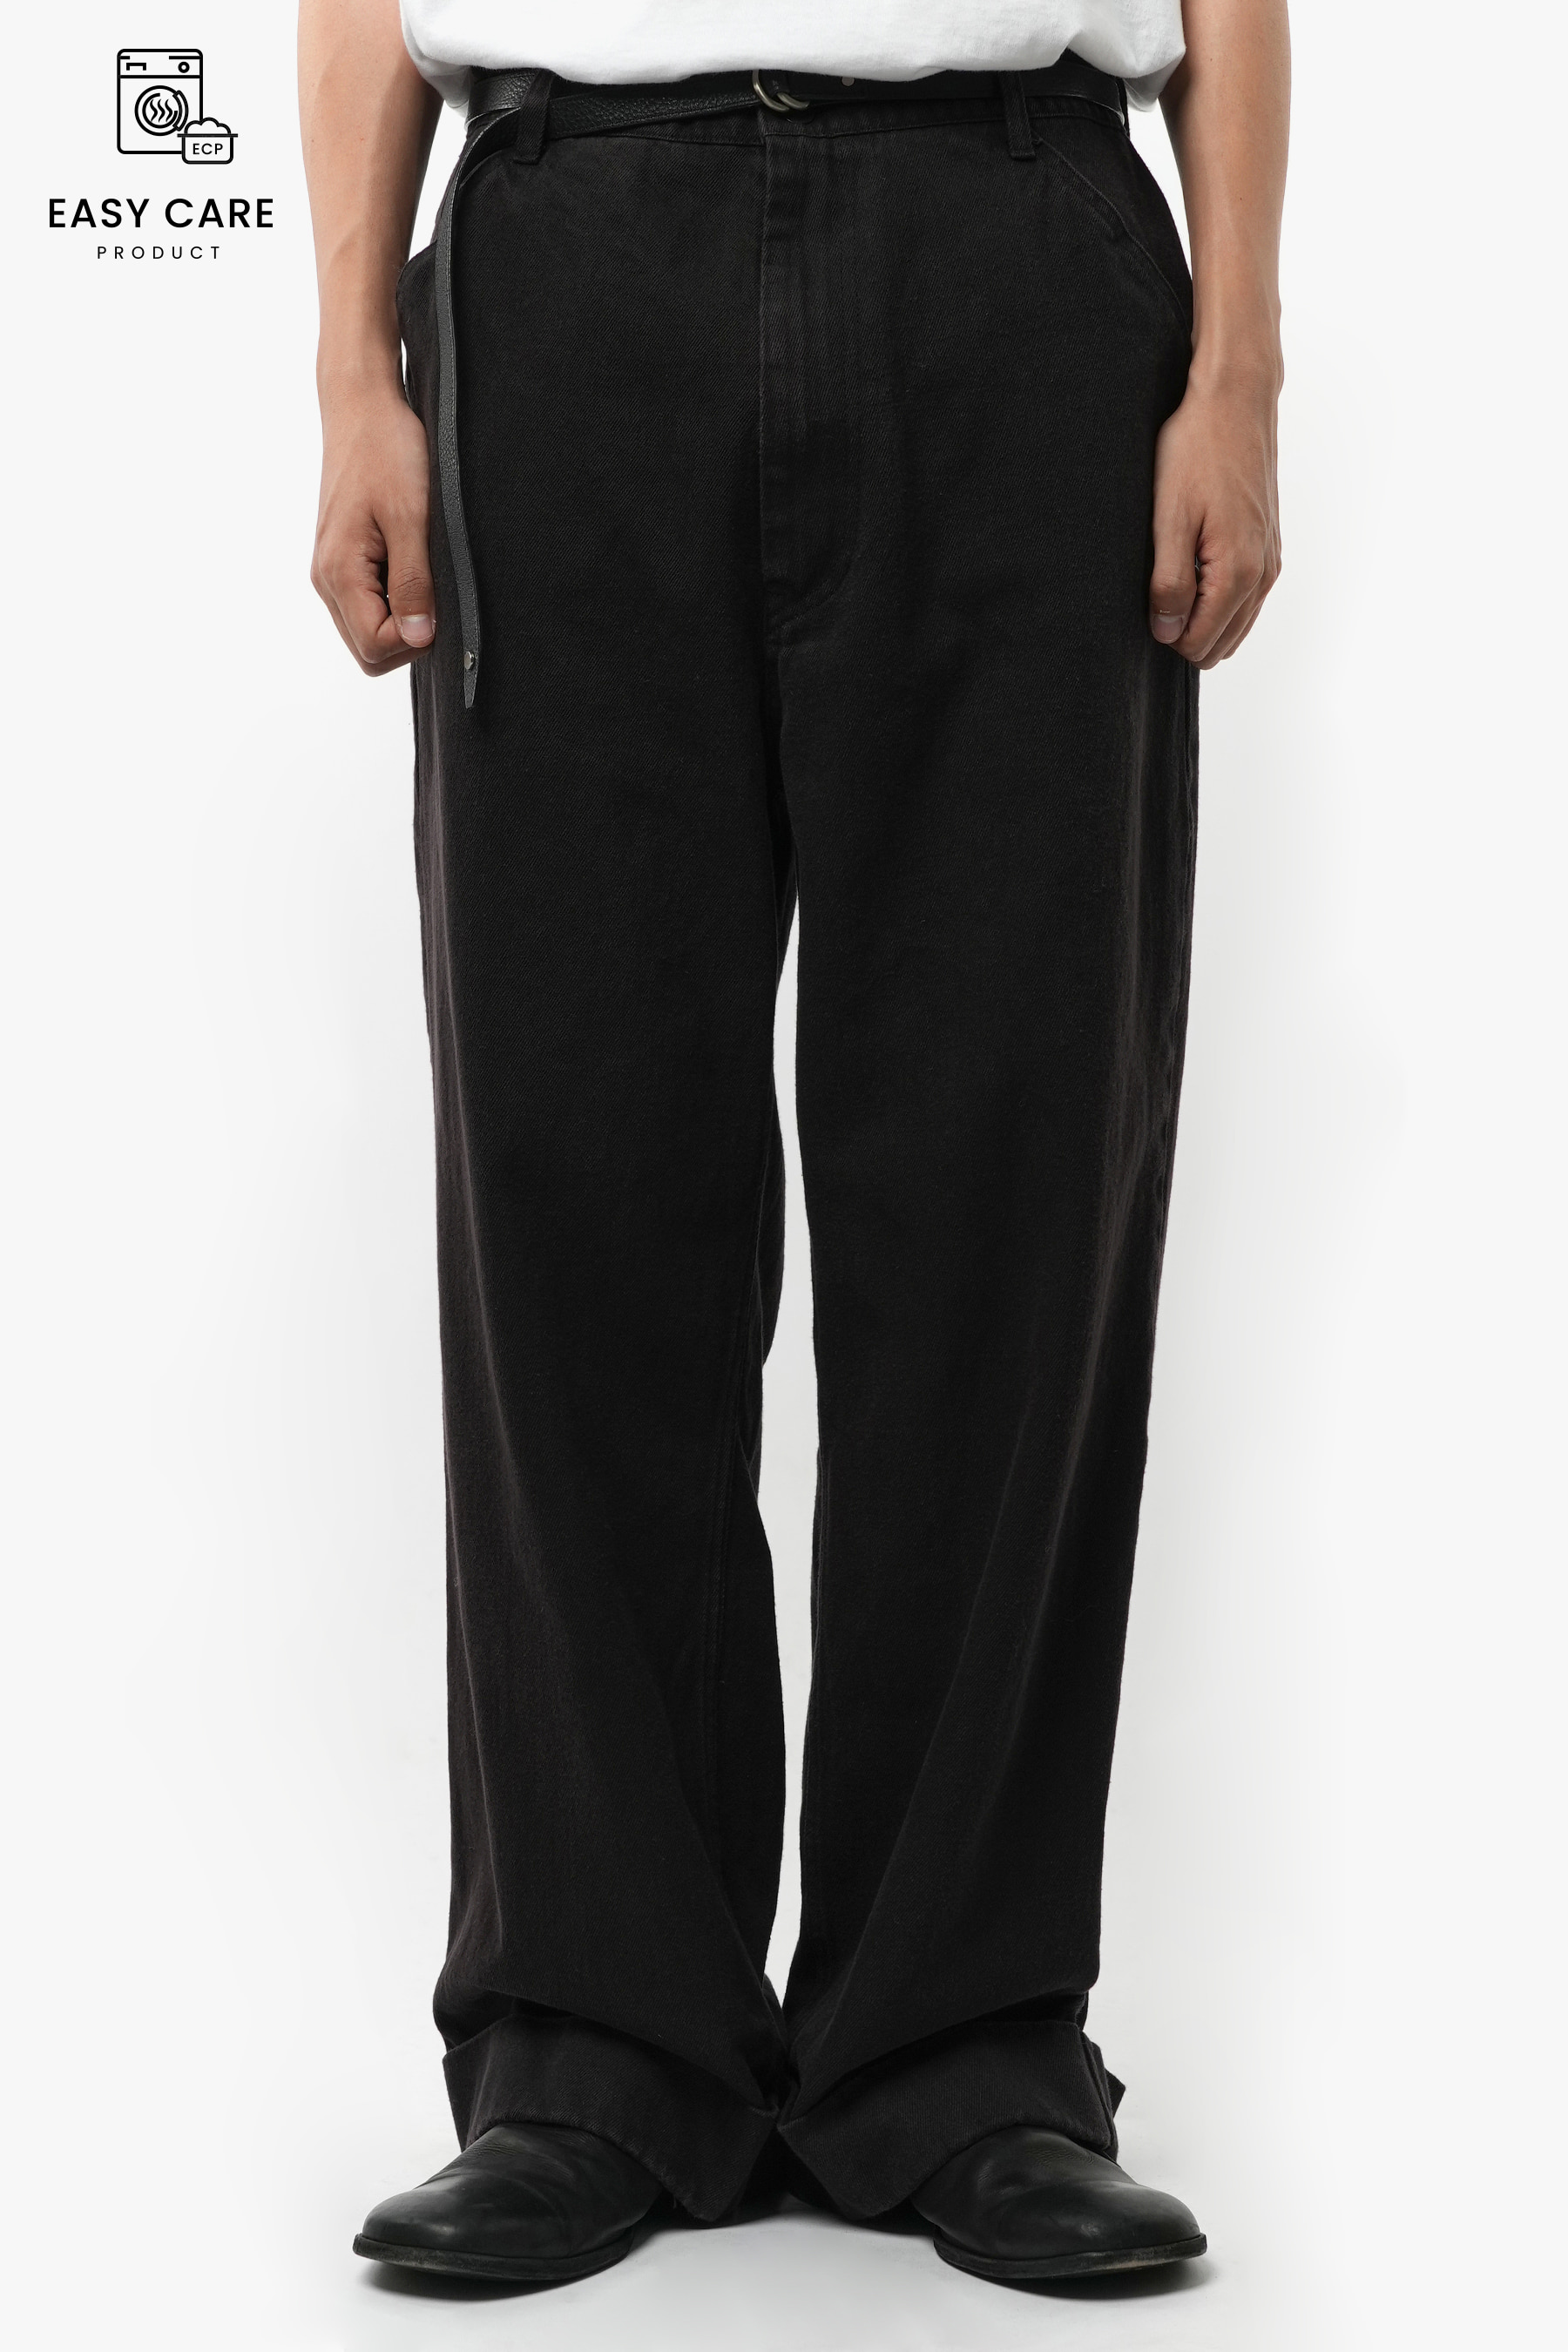 [REUSE] DUSTY BLACK WASHED TURN UP WIDE PANTS (ECP GARMENT PROCESS)